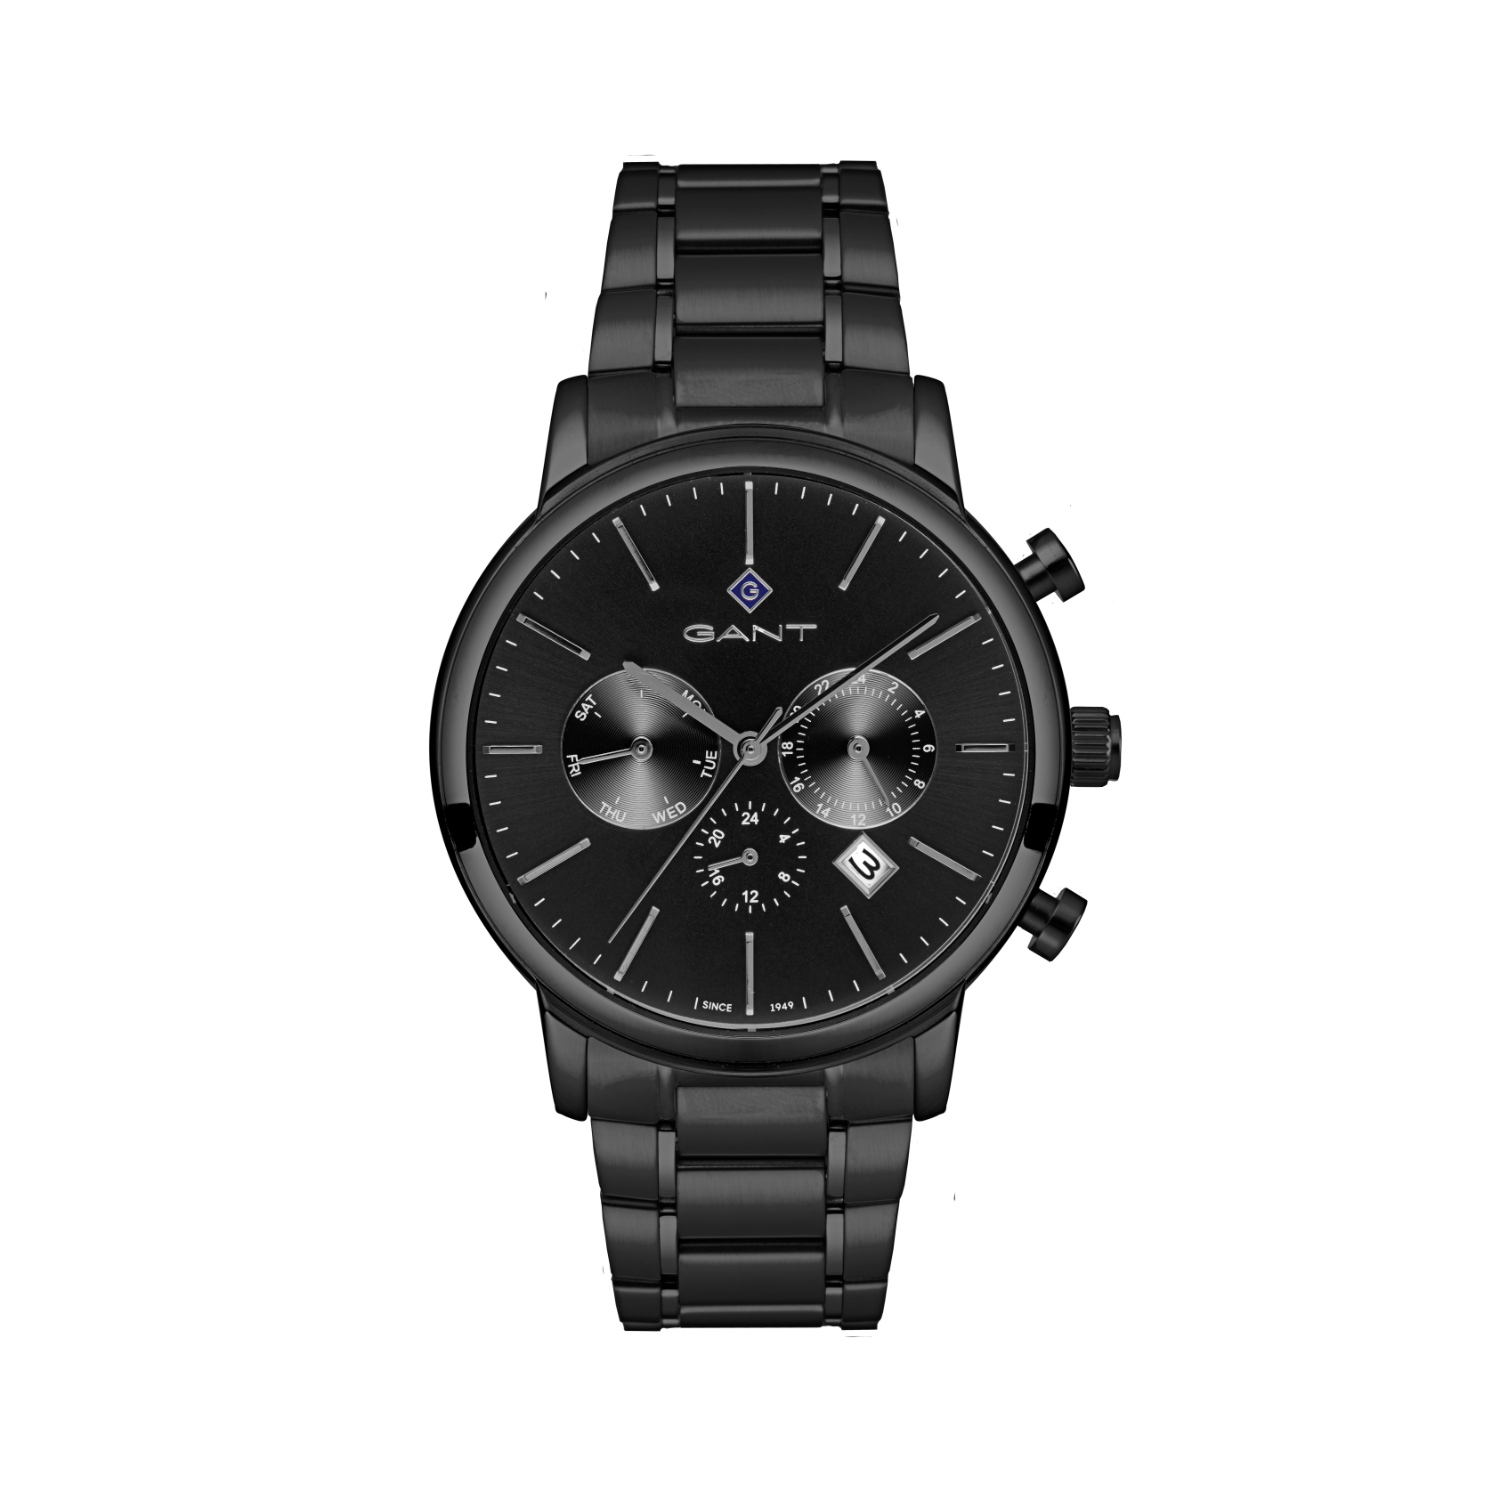 Mens GANT stainless steel watch with black dial and black bracelet.